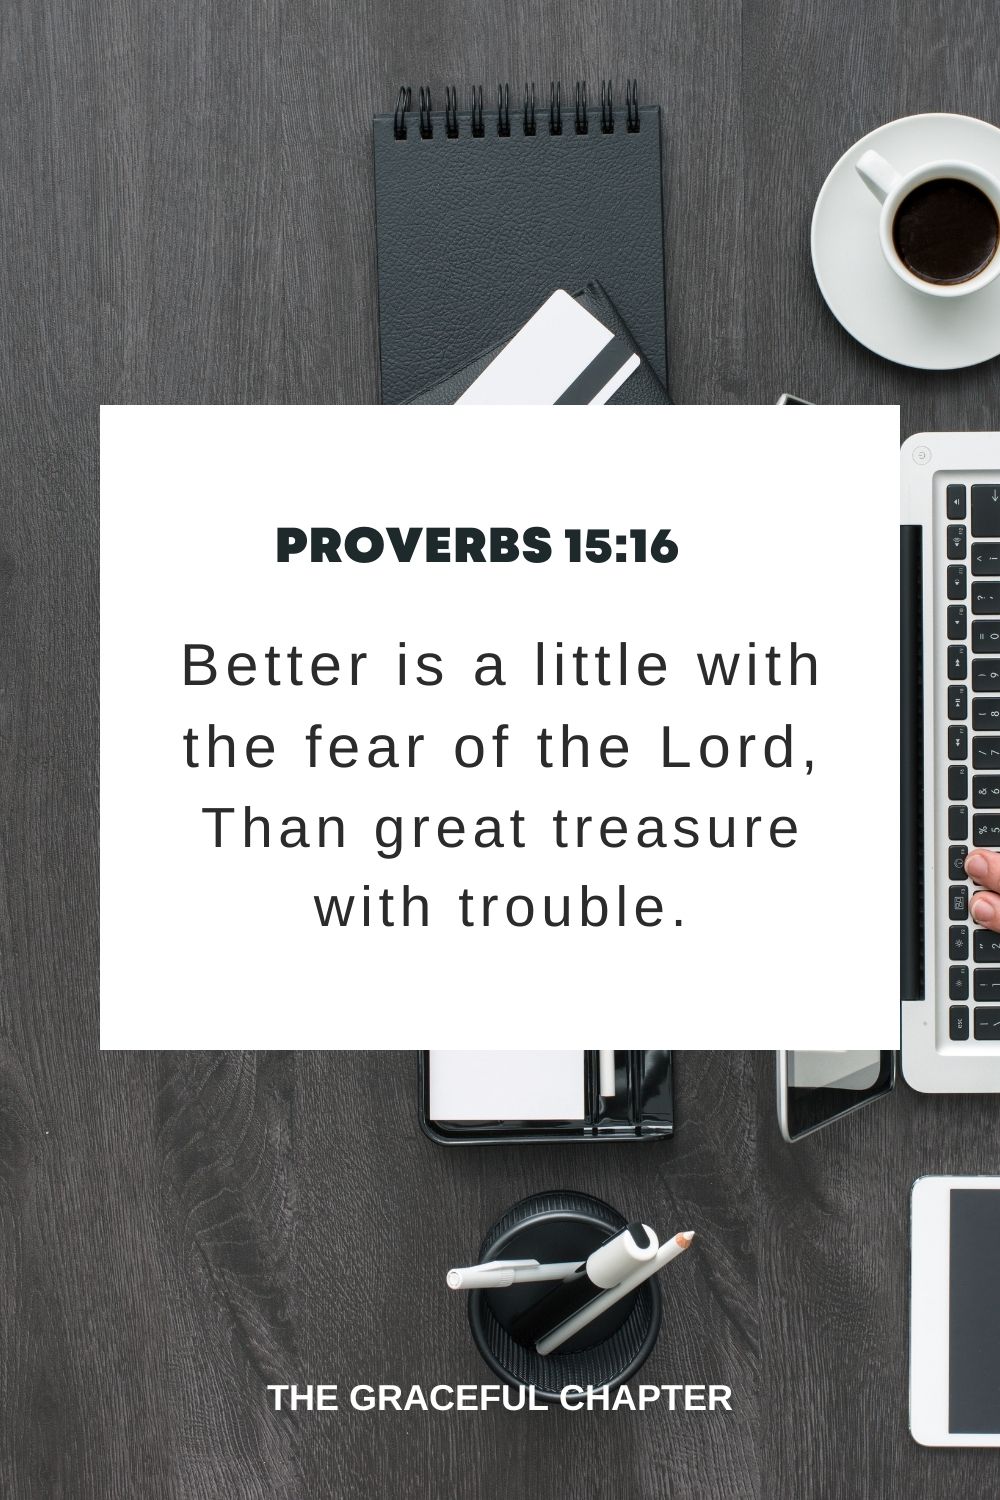 Better is a little with the fear of the Lord, Than great treasure with trouble. Proverbs 15:16